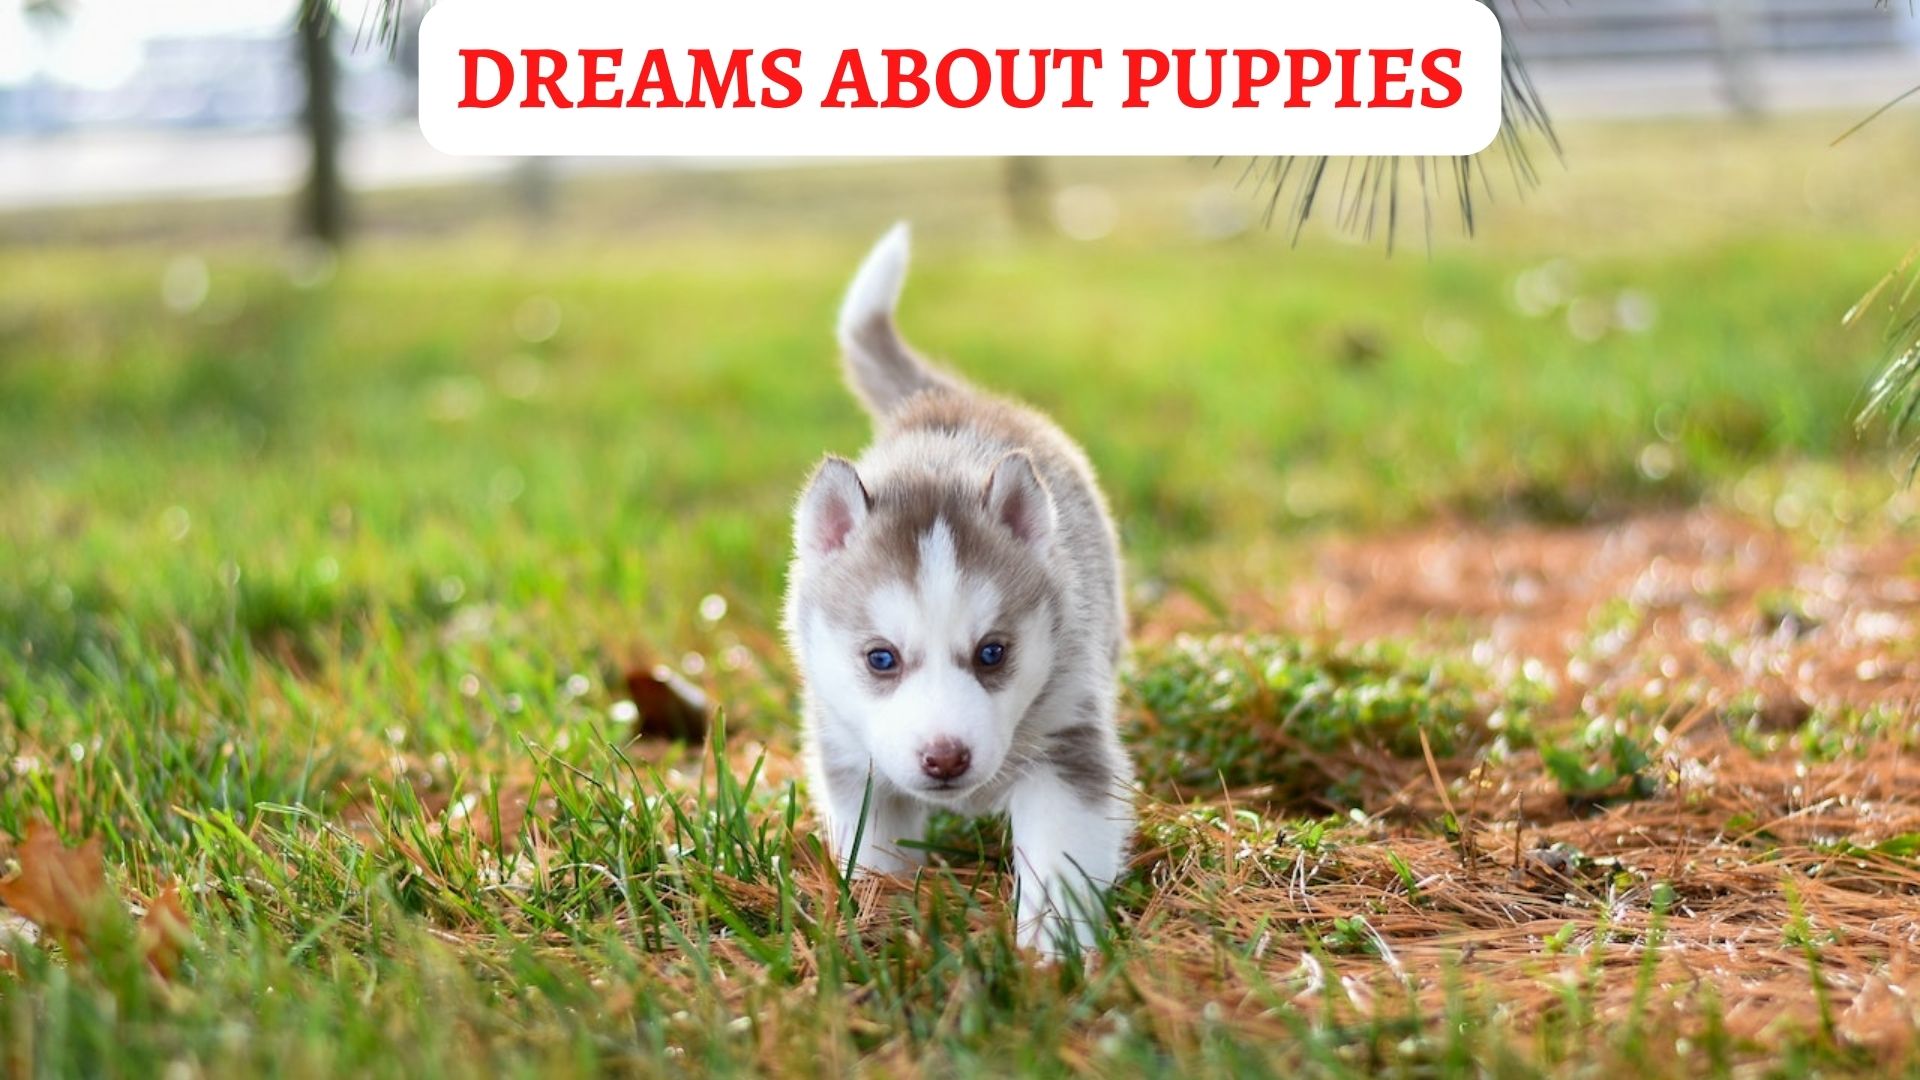 Dreams About Puppies - Strong Feelings Of Emotional Protection